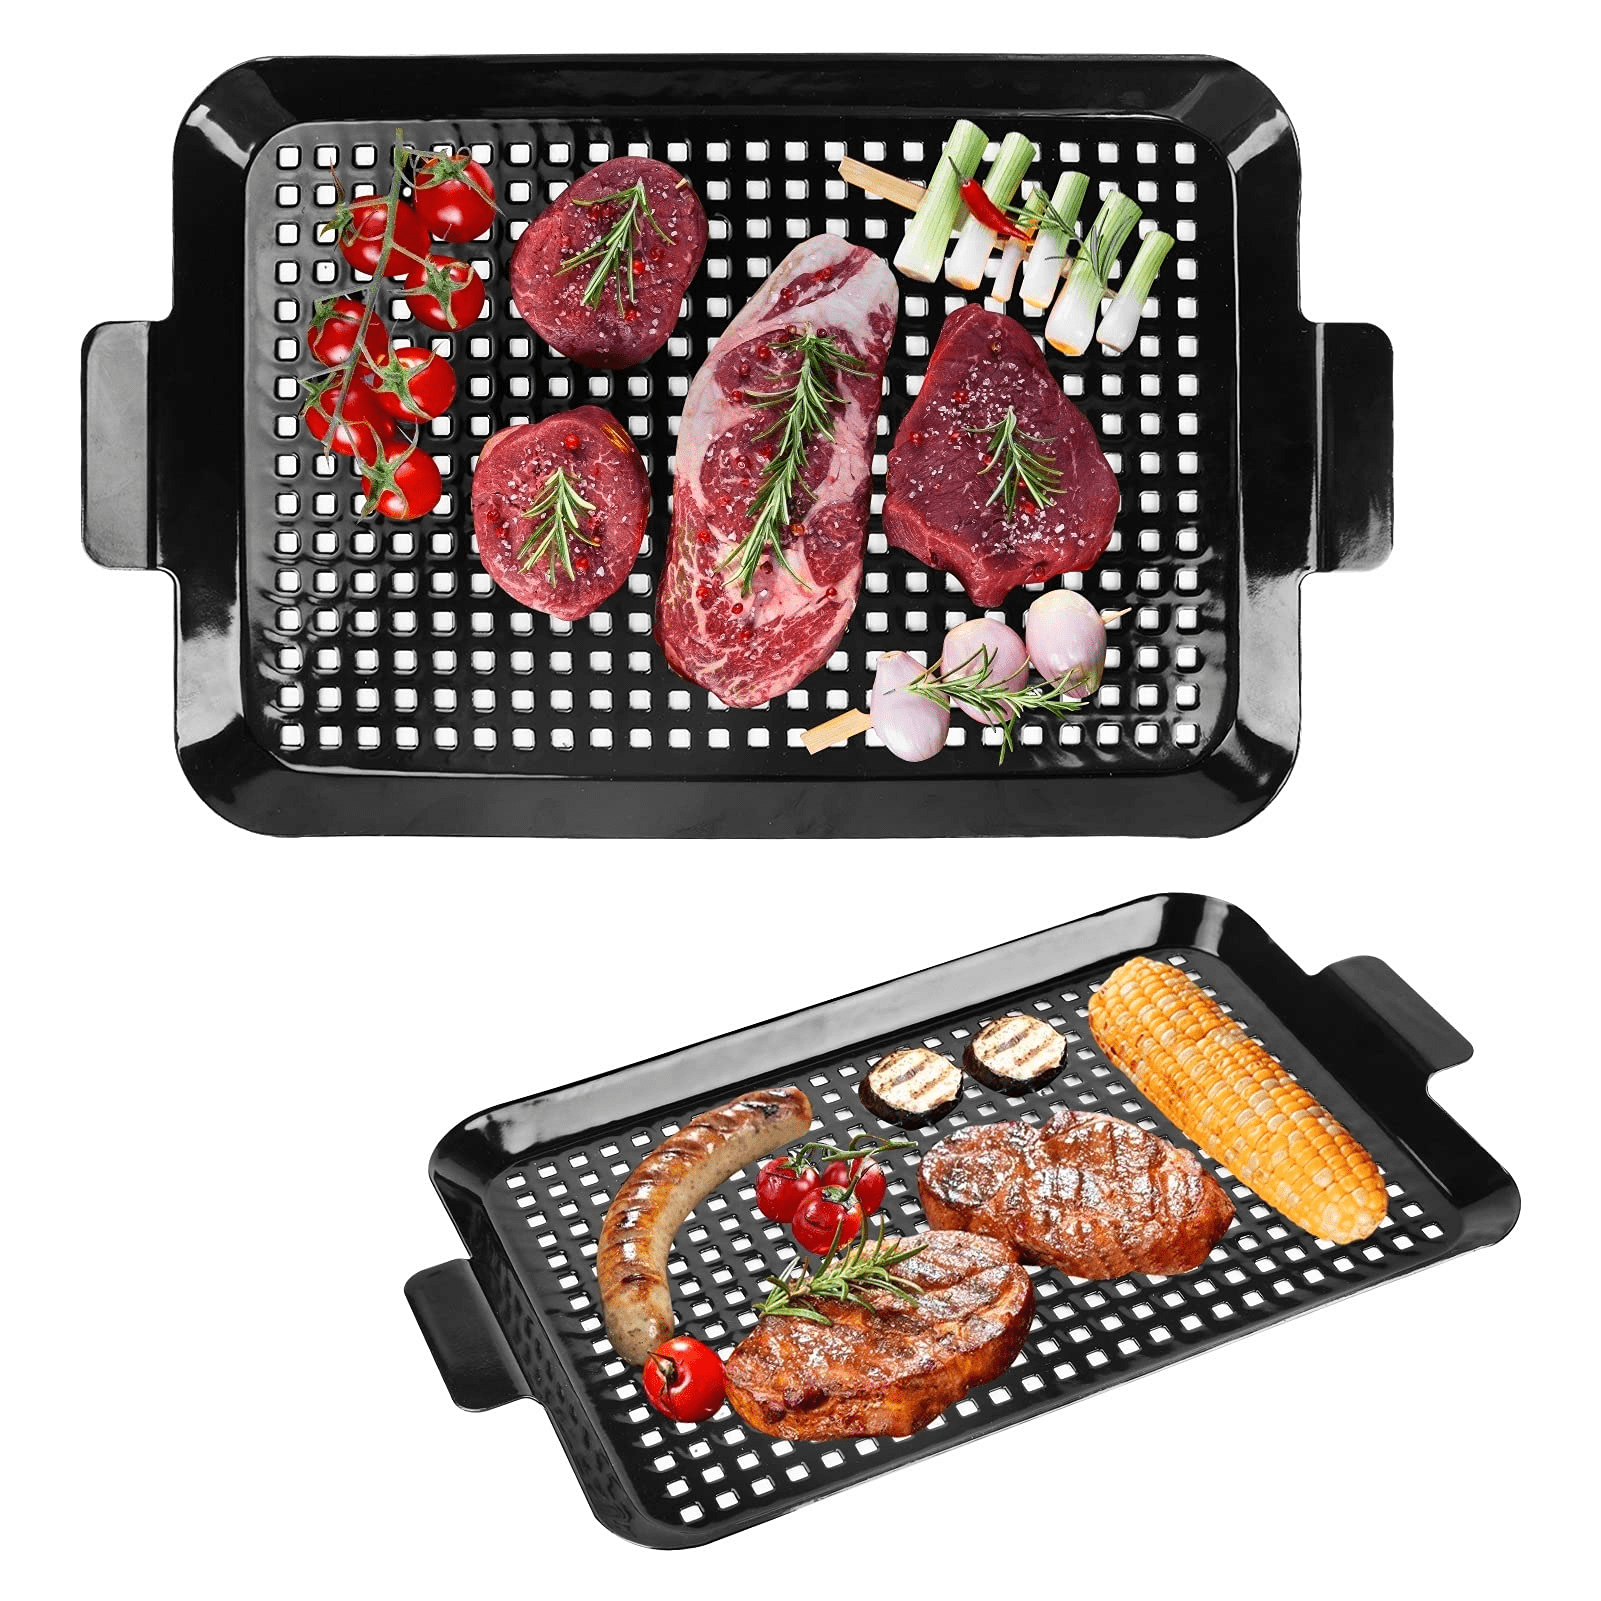 Grill Xpert Grill Topper for Outdoor Grill (4 Pack) - Disposable Grill Topper - Grill Mesh - 14x11 inch Meat and Vegtable Disposable Grill Grates, Sil